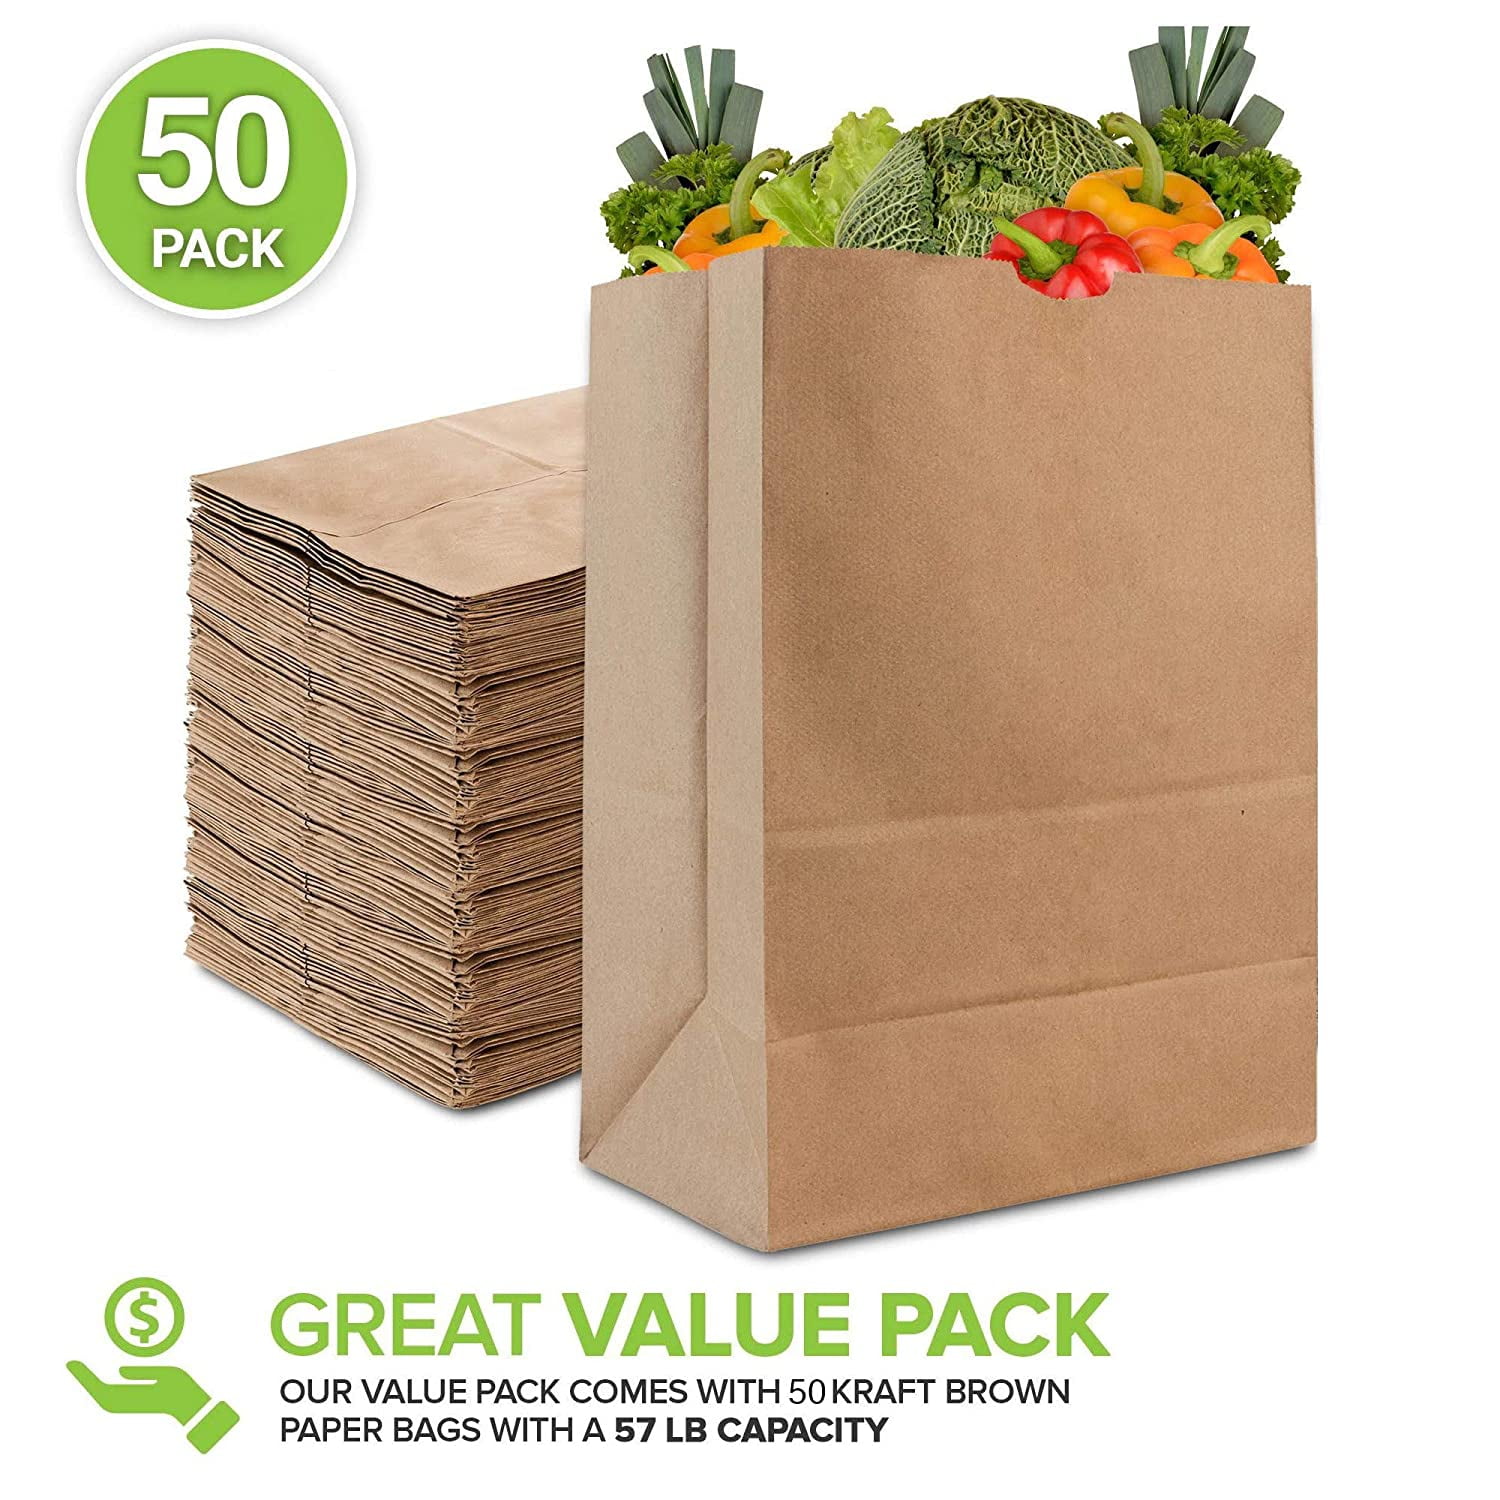 Great Value White Lunch Bags, 50 Count